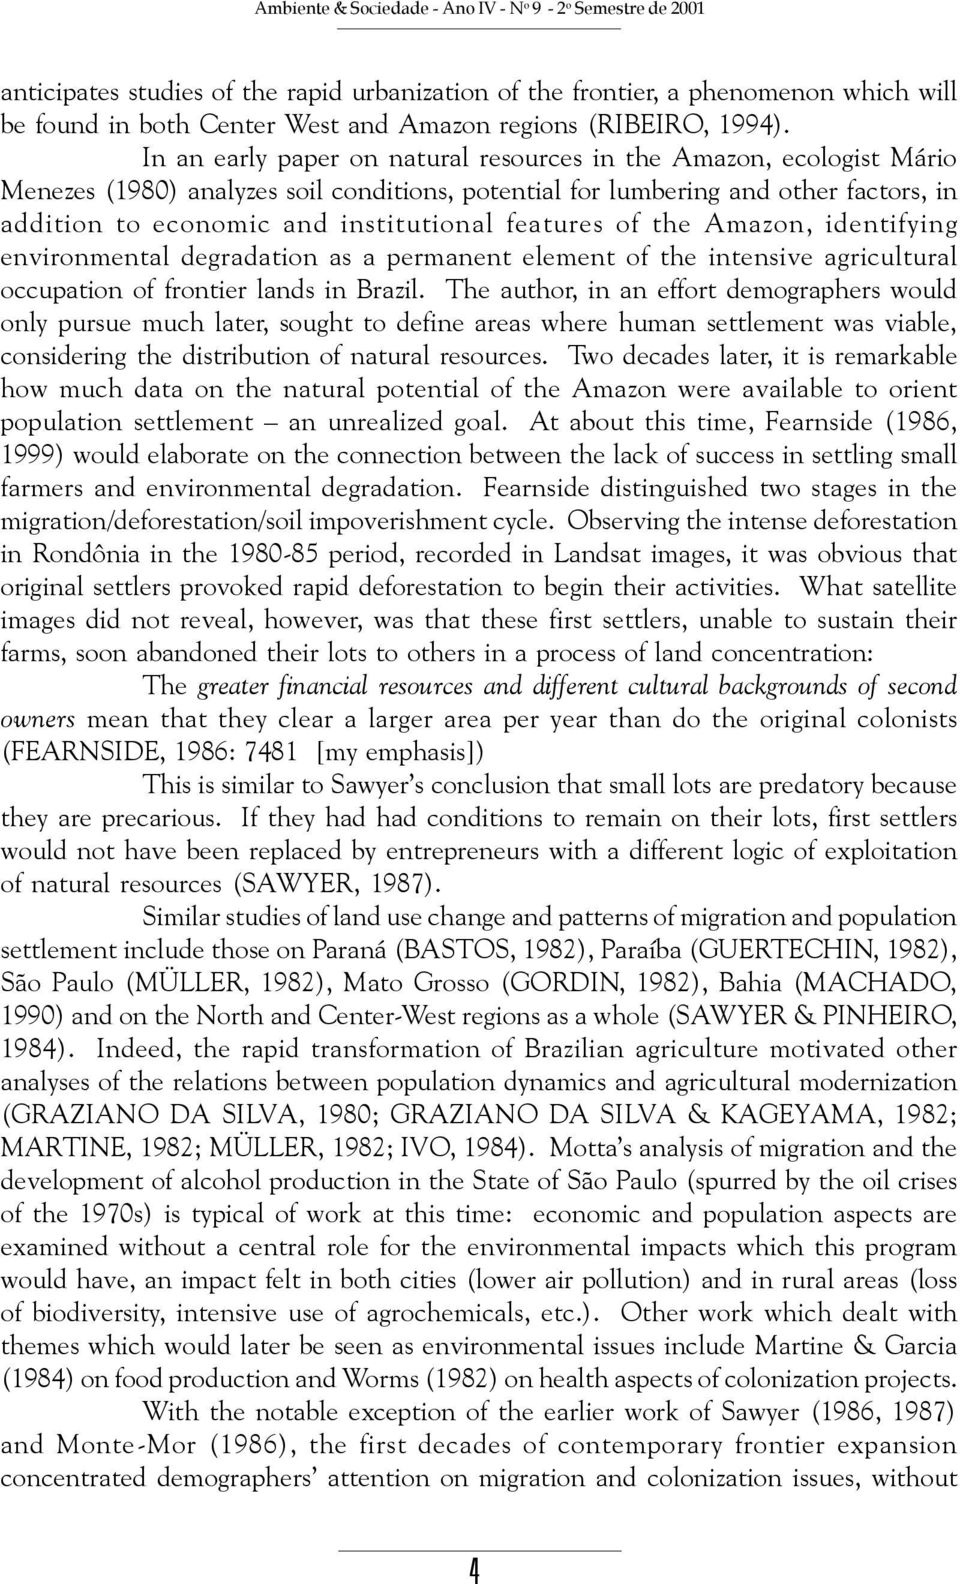 In an early paper on natural resources in the Amazon, ecologist Mário Menezes (1980) analyzes soil conditions, potential for lumbering and other factors, in addition to economic and institutional